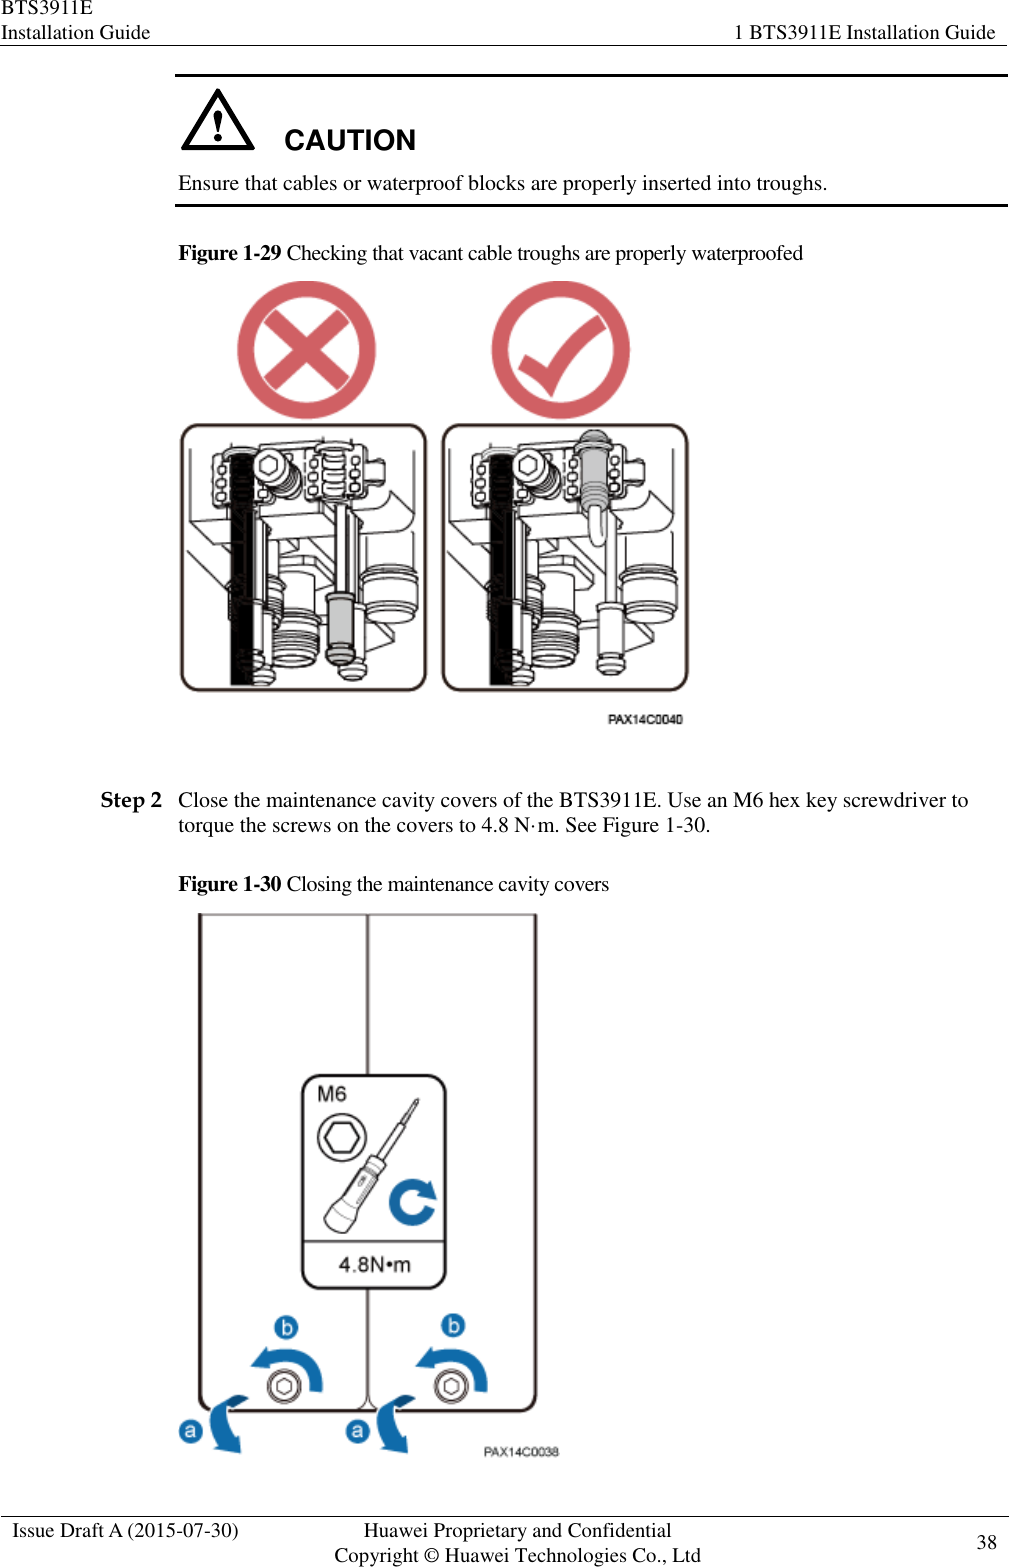 BTS3911E Installation Guide 1 BTS3911E Installation Guide  Issue Draft A (2015-07-30) Huawei Proprietary and Confidential           Copyright © Huawei Technologies Co., Ltd 38    CAUTION Ensure that cables or waterproof blocks are properly inserted into troughs. Figure 1-29 Checking that vacant cable troughs are properly waterproofed   Step 2 Close the maintenance cavity covers of the BTS3911E. Use an M6 hex key screwdriver to torque the screws on the covers to 4.8 N·m. See Figure 1-30. Figure 1-30 Closing the maintenance cavity covers  